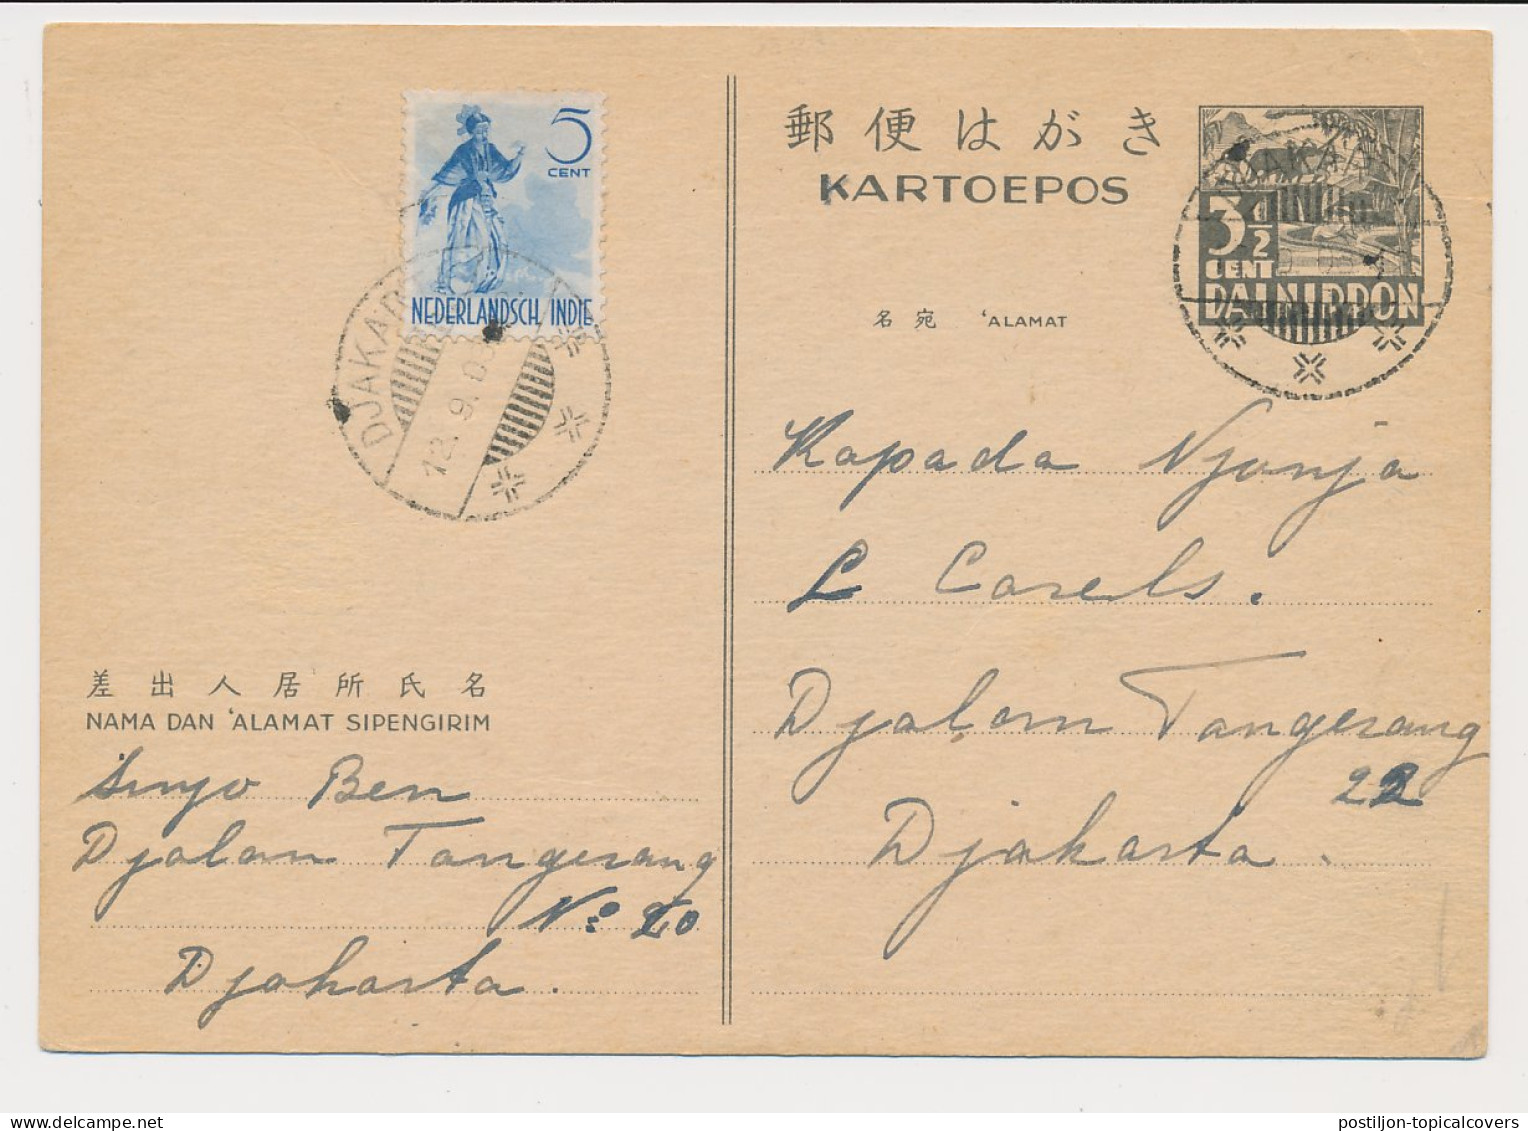 Censored Card - From And To Camp Djakarta Netherlands Indies2603 - Netherlands Indies